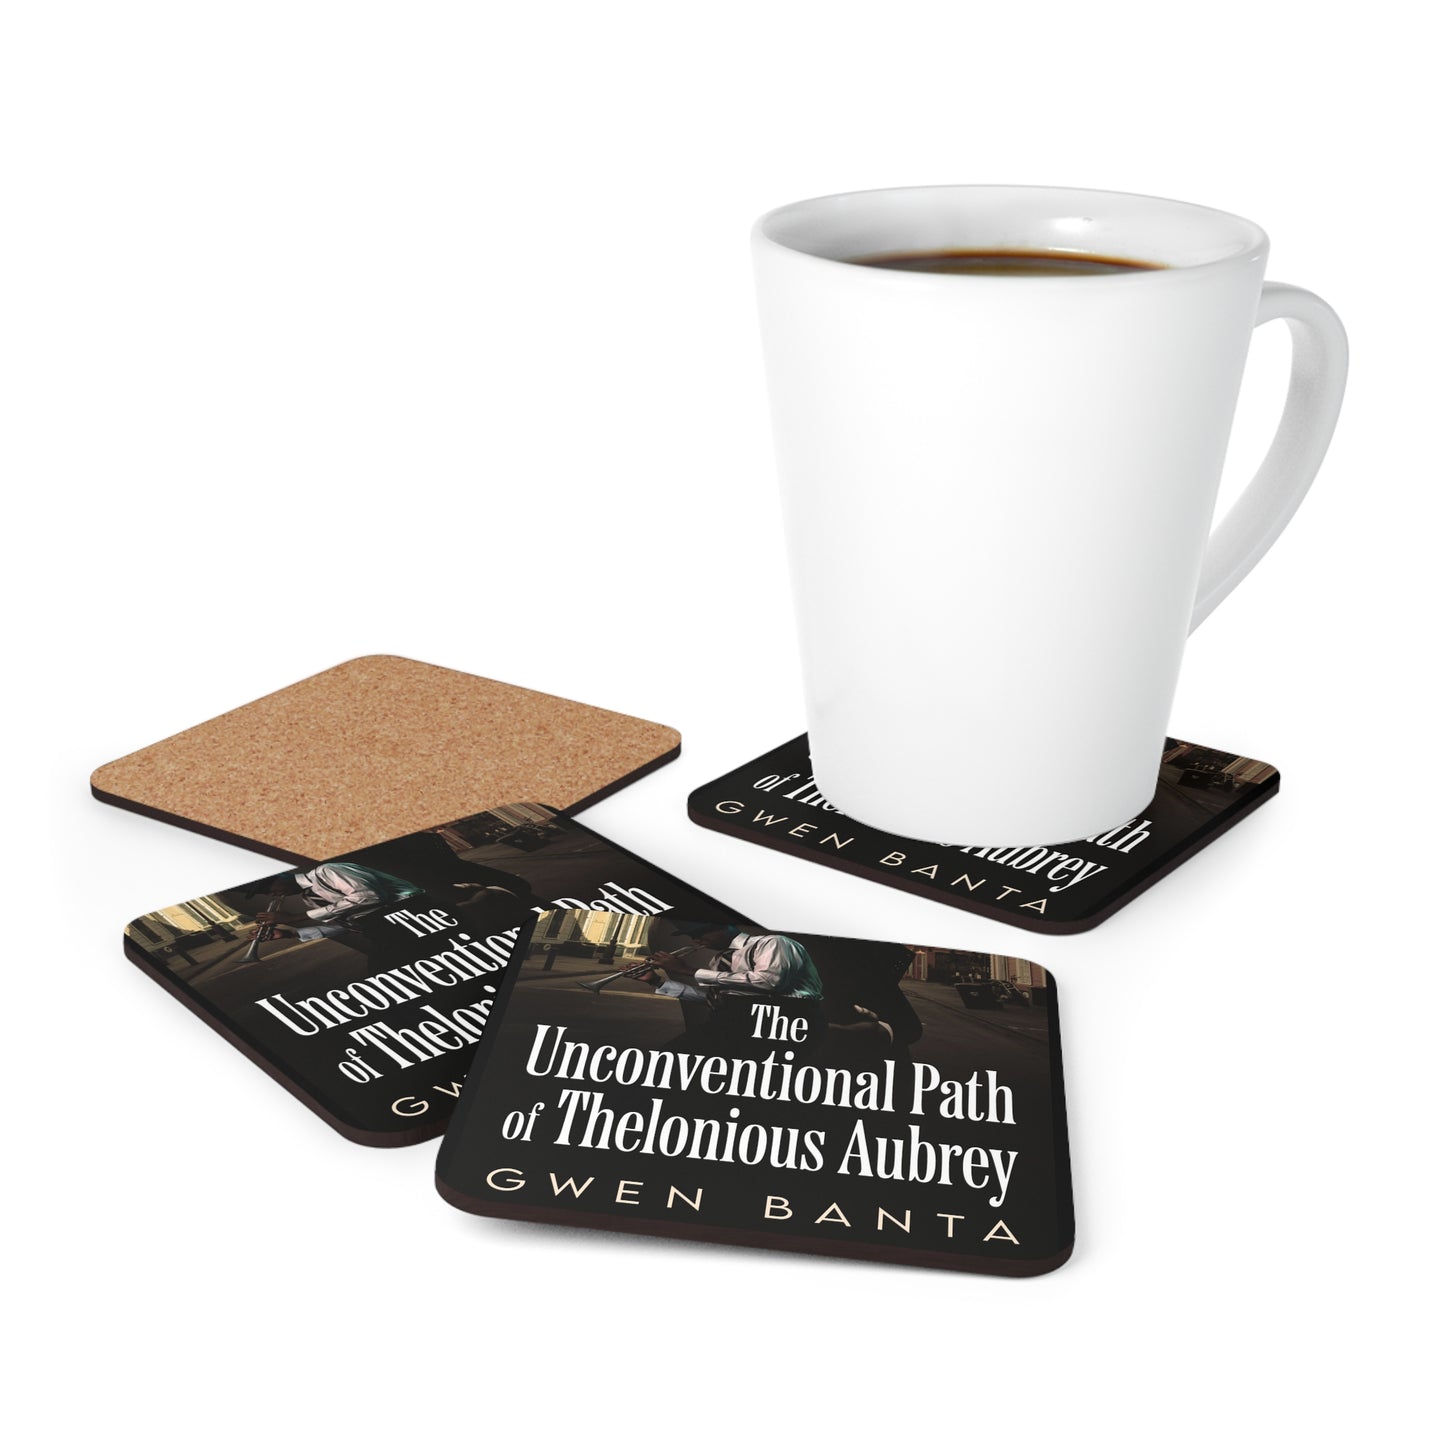 The Unconventional Path of Thelonious Aubrey - Corkwood Coaster Set